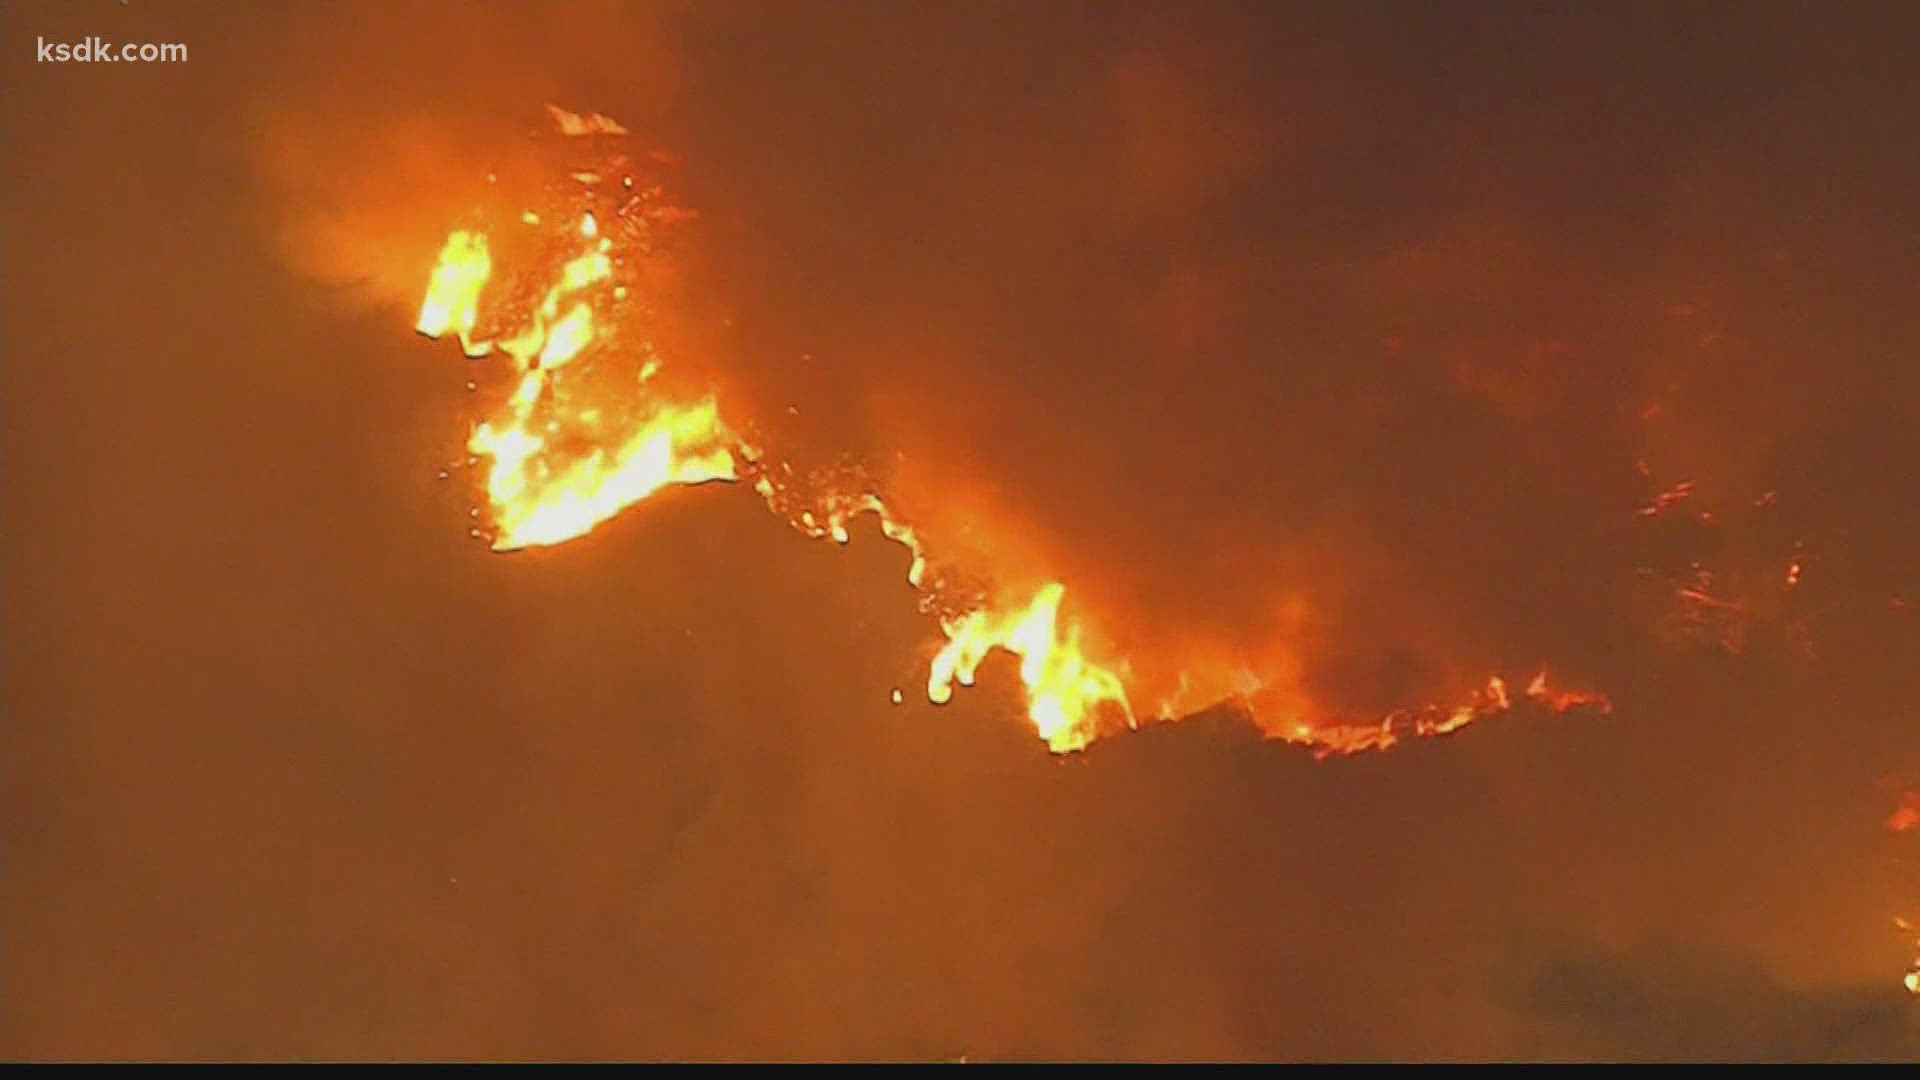 The El Dorado fire started on Saturday by what Cal Fire says was a "smoke generating pyrotechnic device"